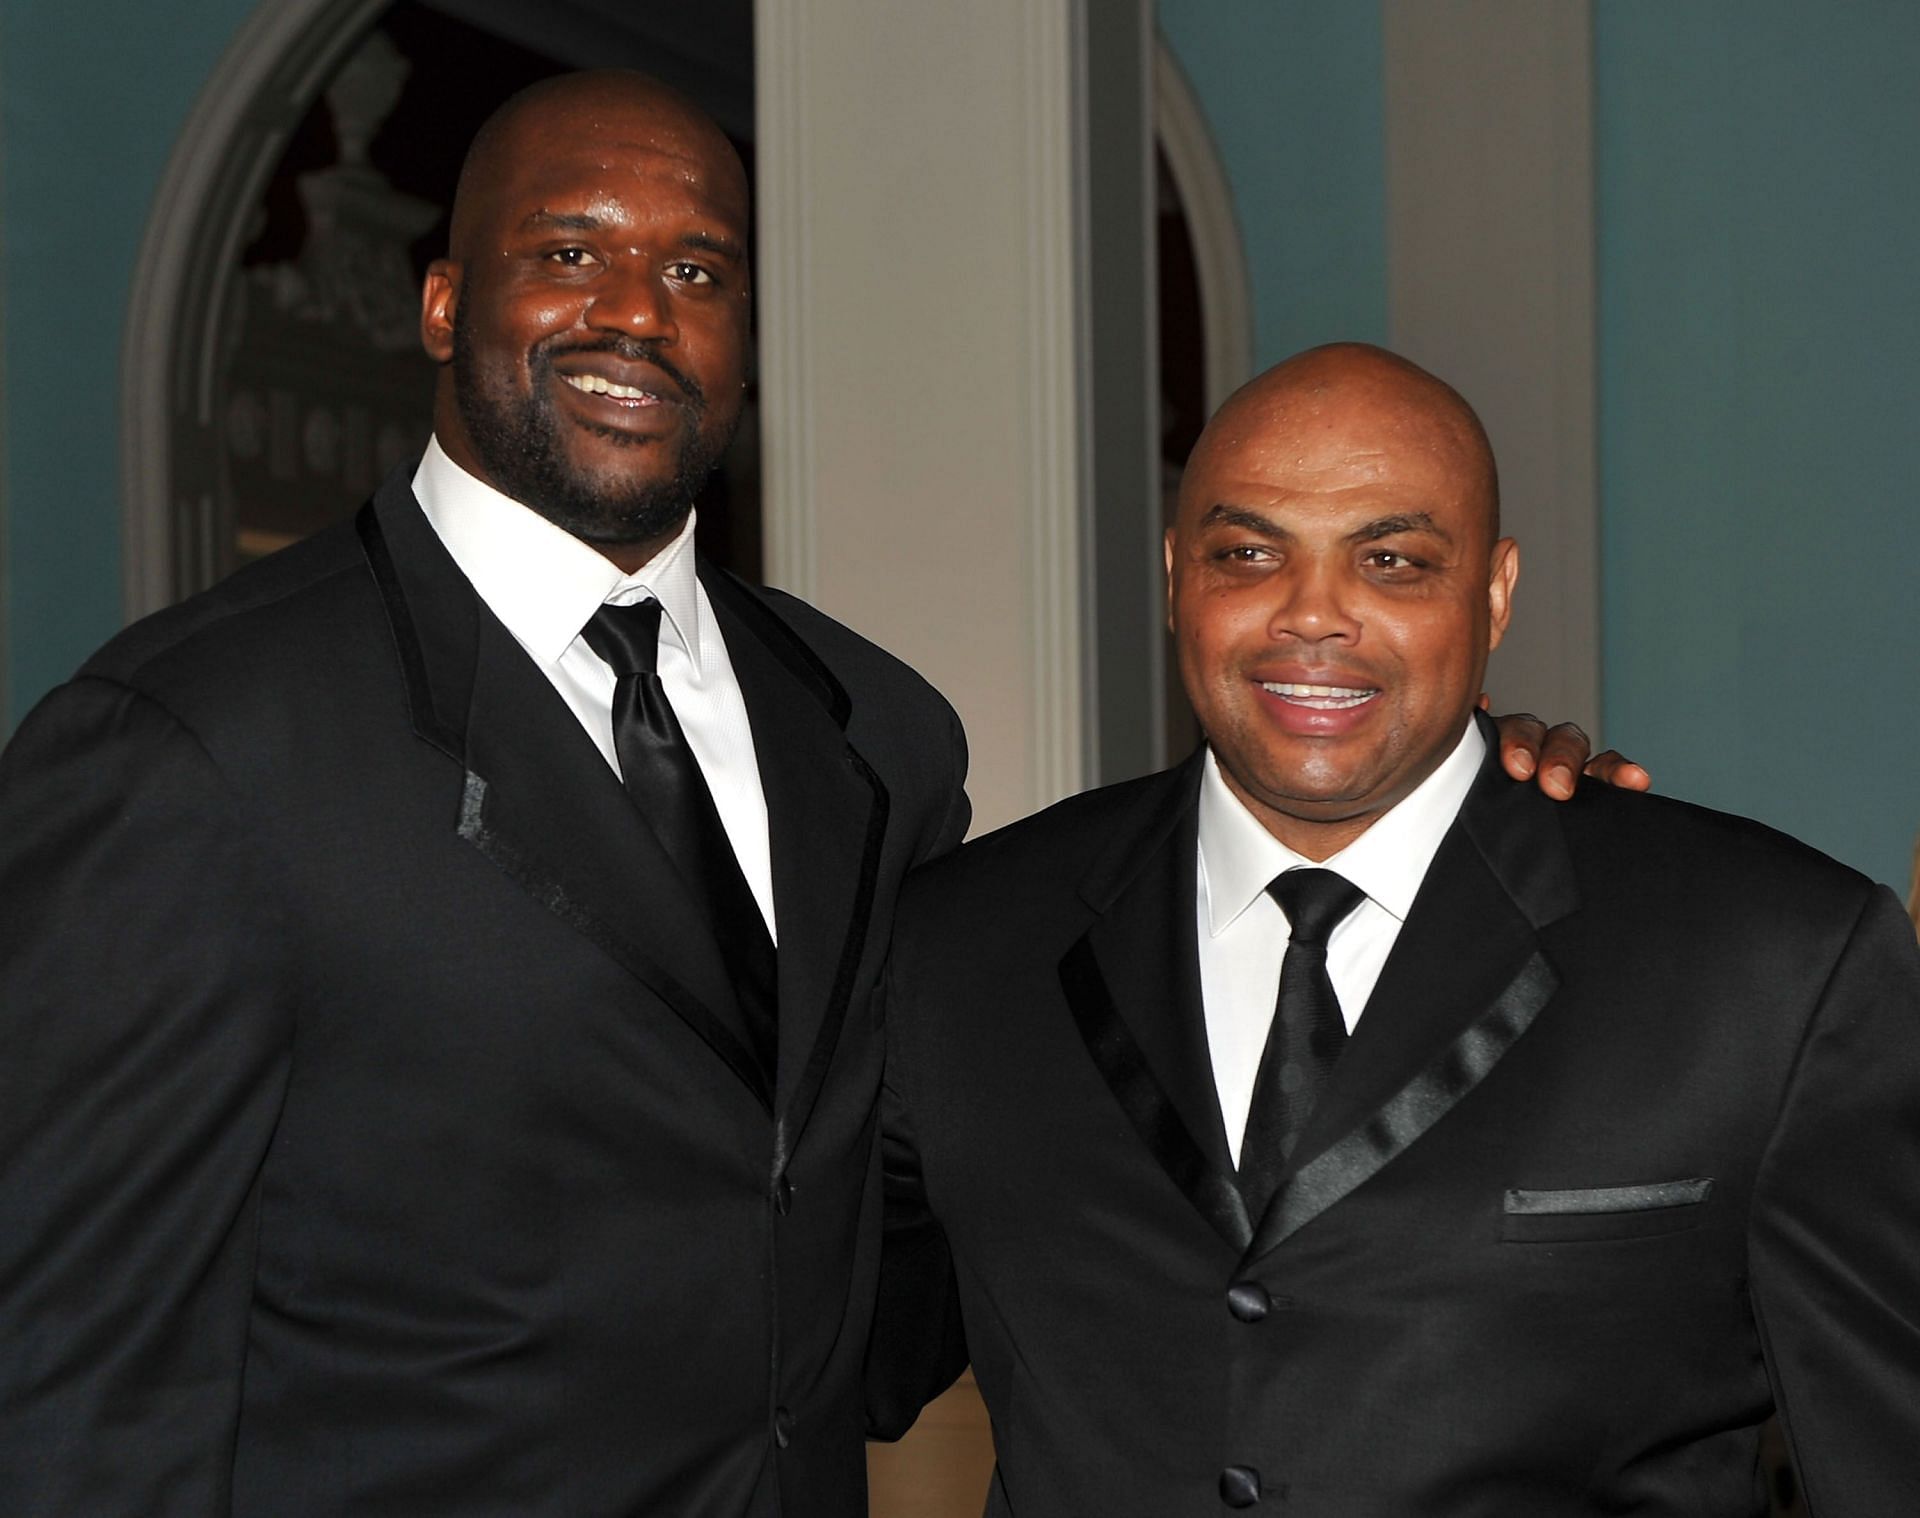 Shaquille O&#039;Neal and Charles Barkley predicted the Golden State Warriors to take away the Denver Nuggets&#039; lunch if Steph Curry is healthy. [Photo: Sportcasting]